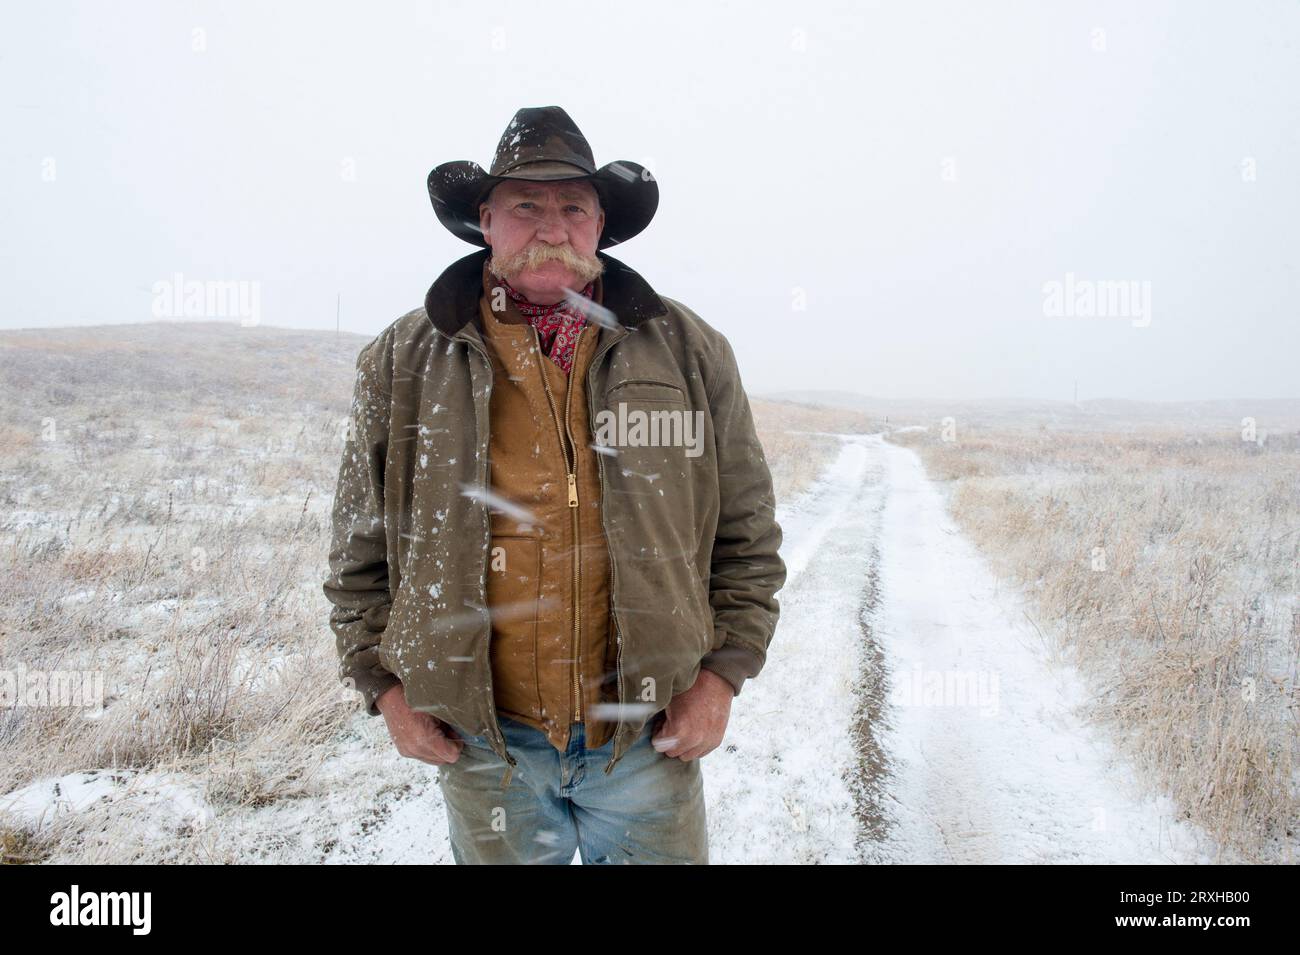 Outdoor portrait of a man in a cowboy hat standing on a dirt road during a snow storm; Burwell, Nebraska, United States of America Stock Photo